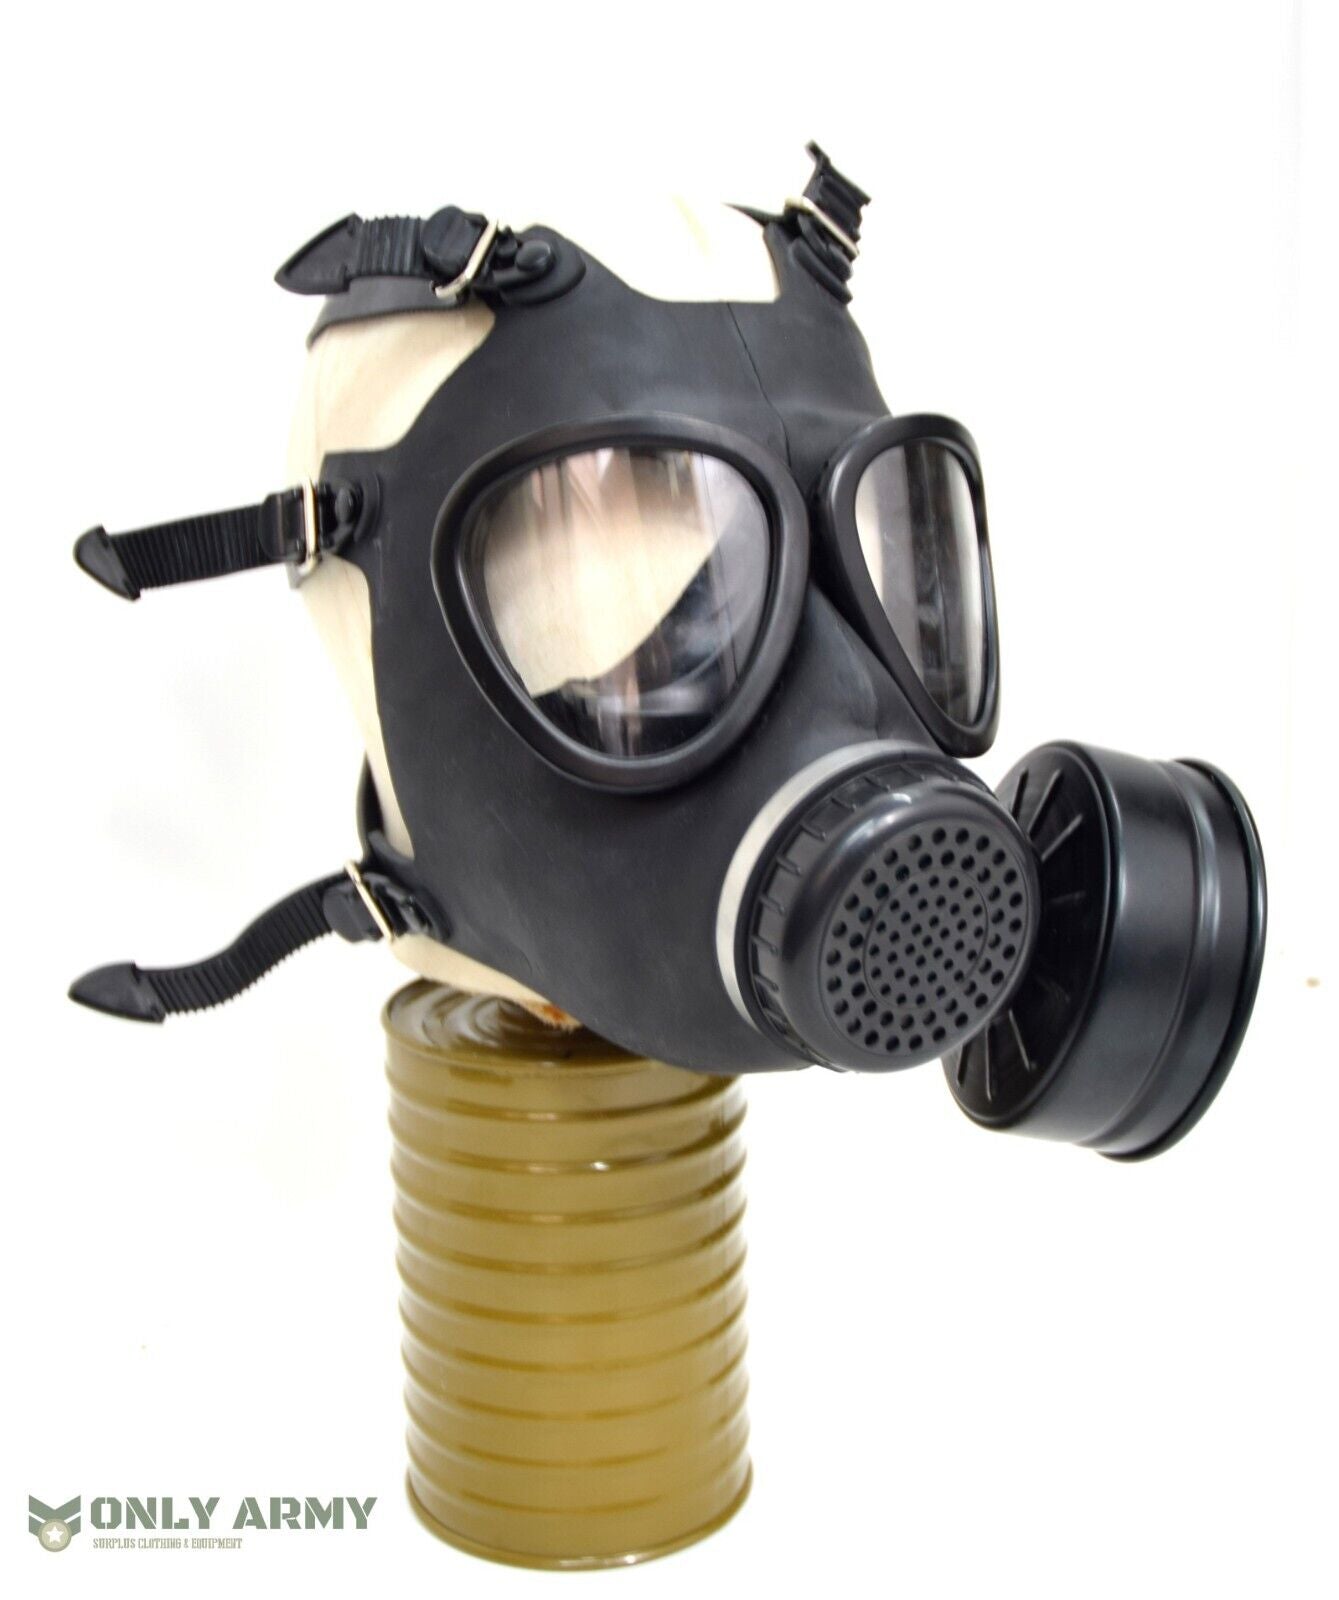 RARE Army Military Surplus Black Rubber Gas Mask 40MM Filter Protective British 